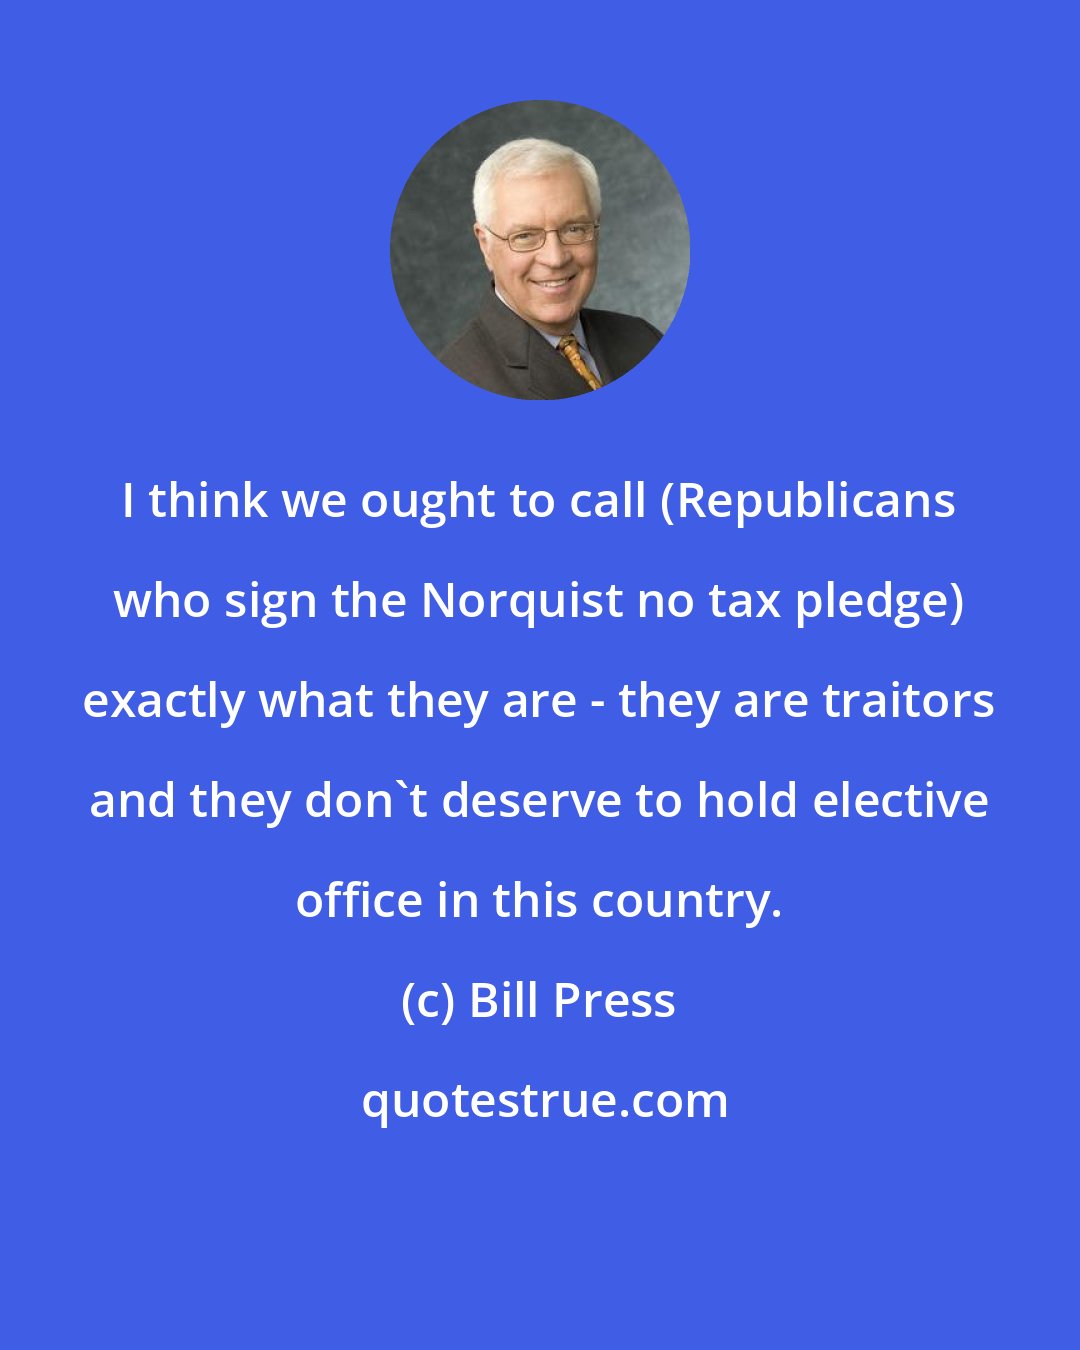 Bill Press: I think we ought to call (Republicans who sign the Norquist no tax pledge) exactly what they are - they are traitors and they don't deserve to hold elective office in this country.